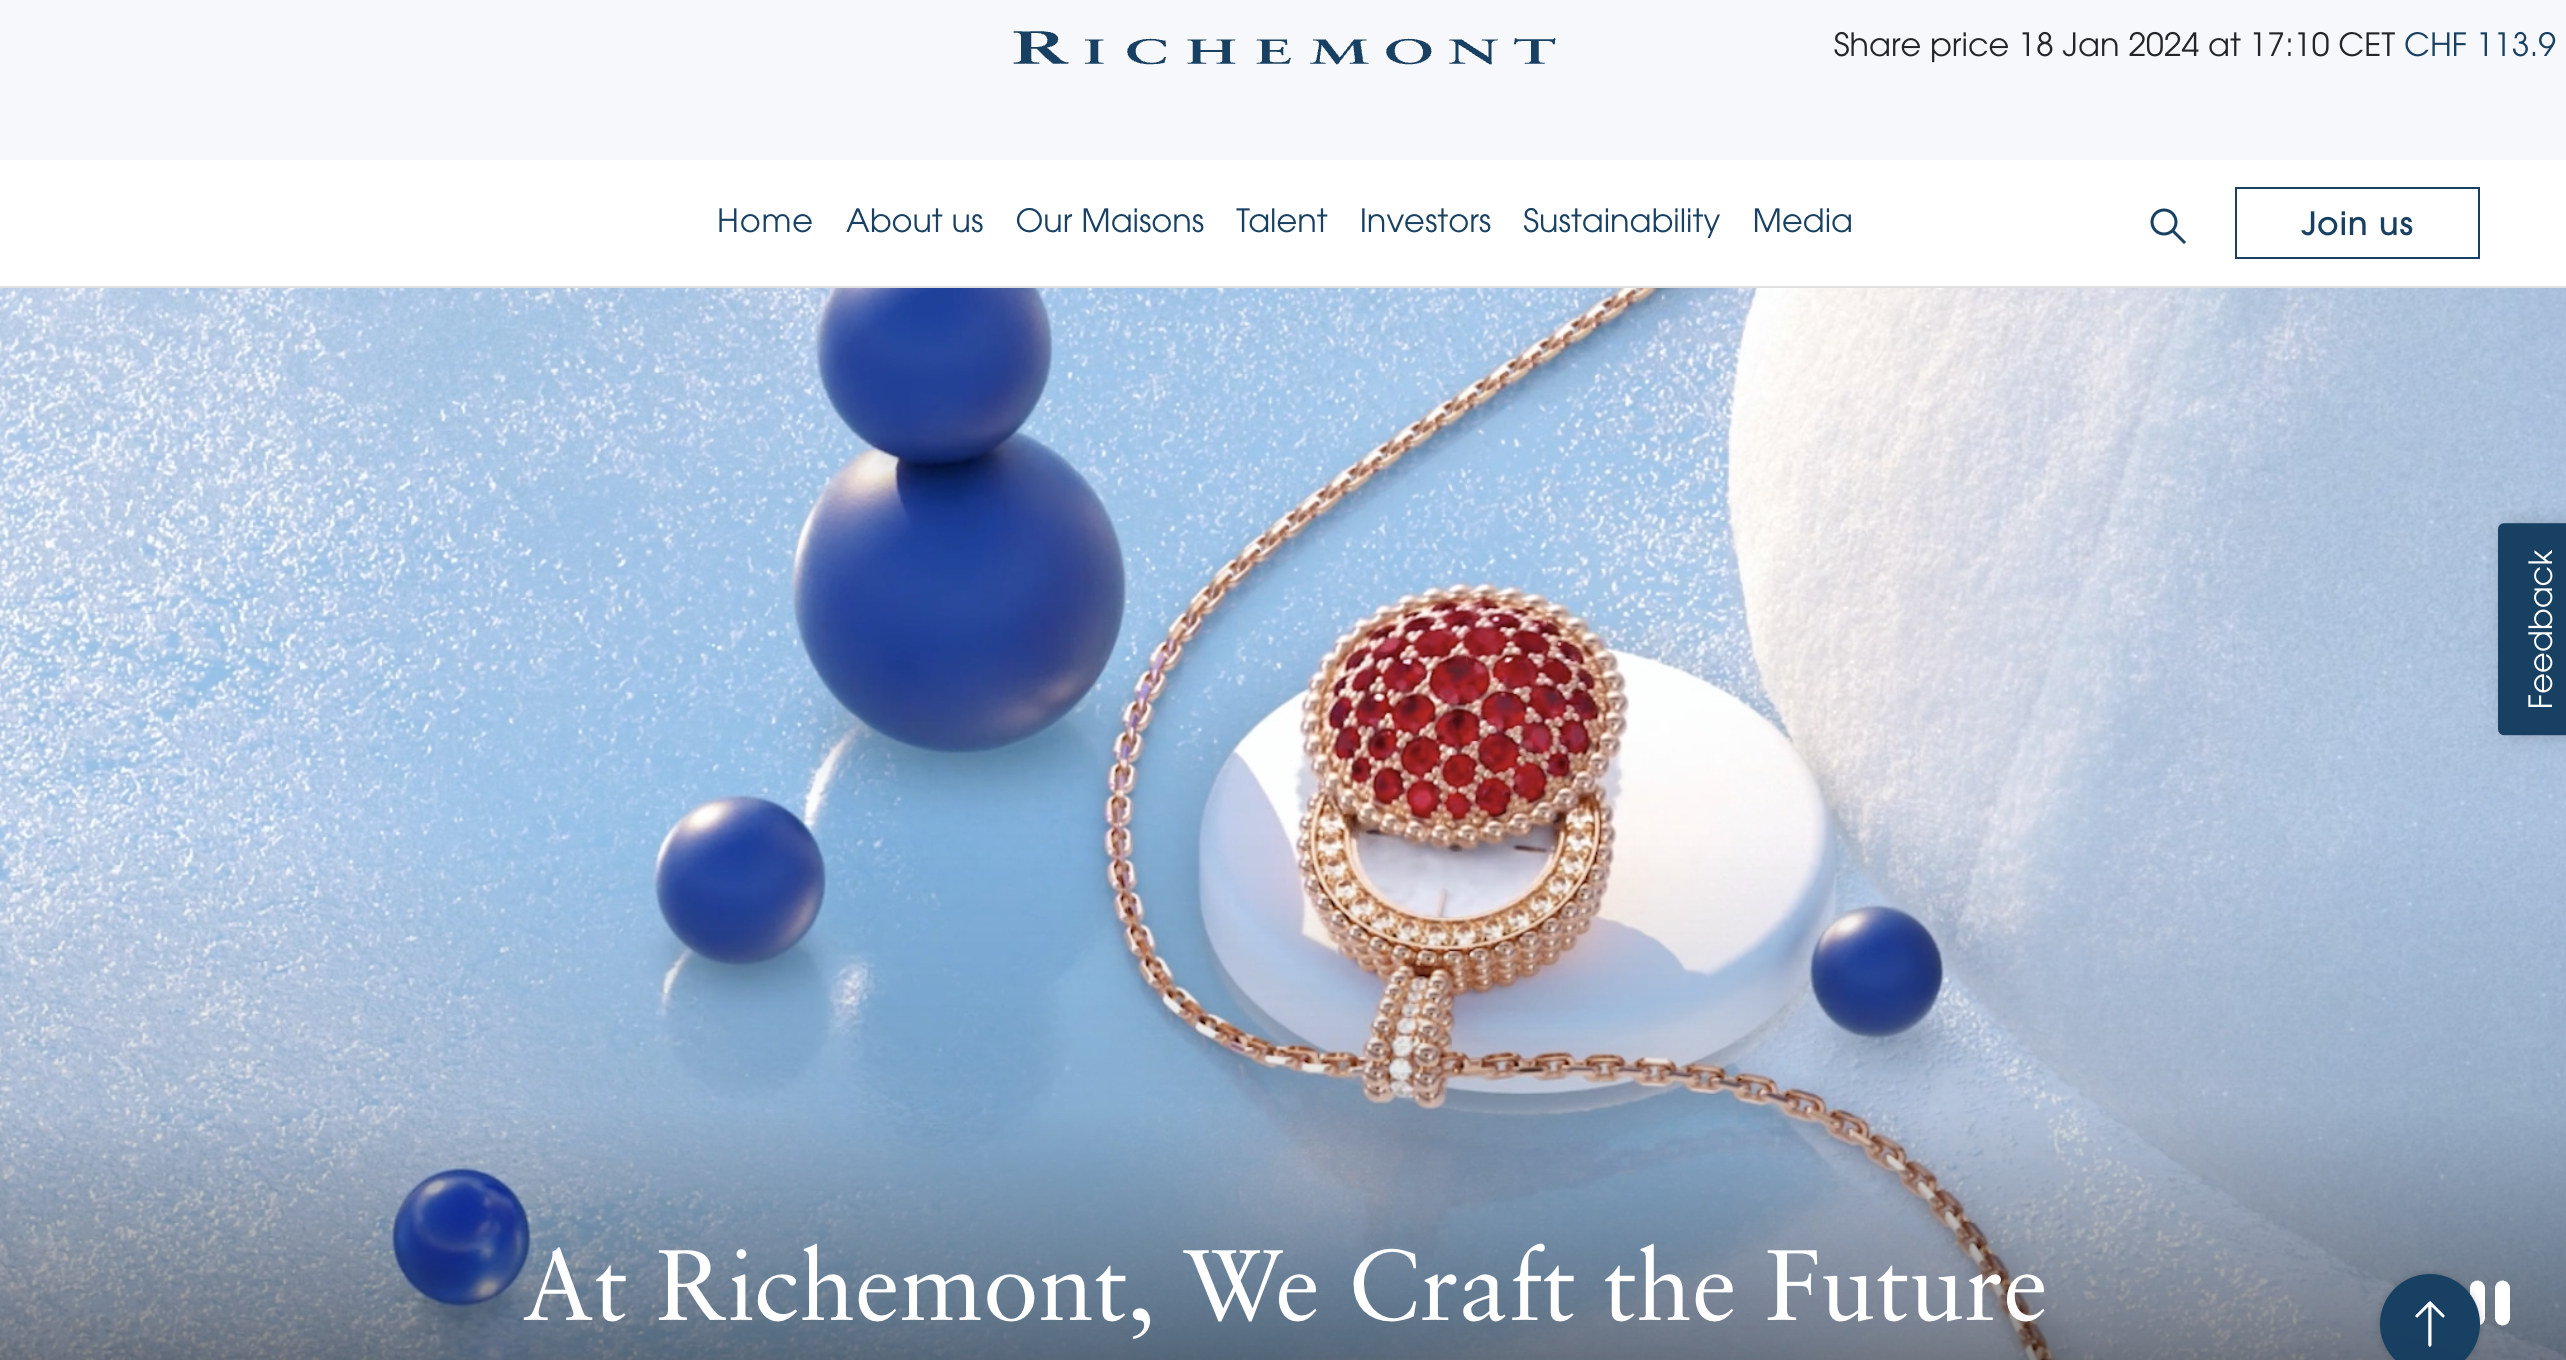 Richemont’s Q3 Sales Increase by 8% to 5.6 Billion Euros, with a 25% Growth in China